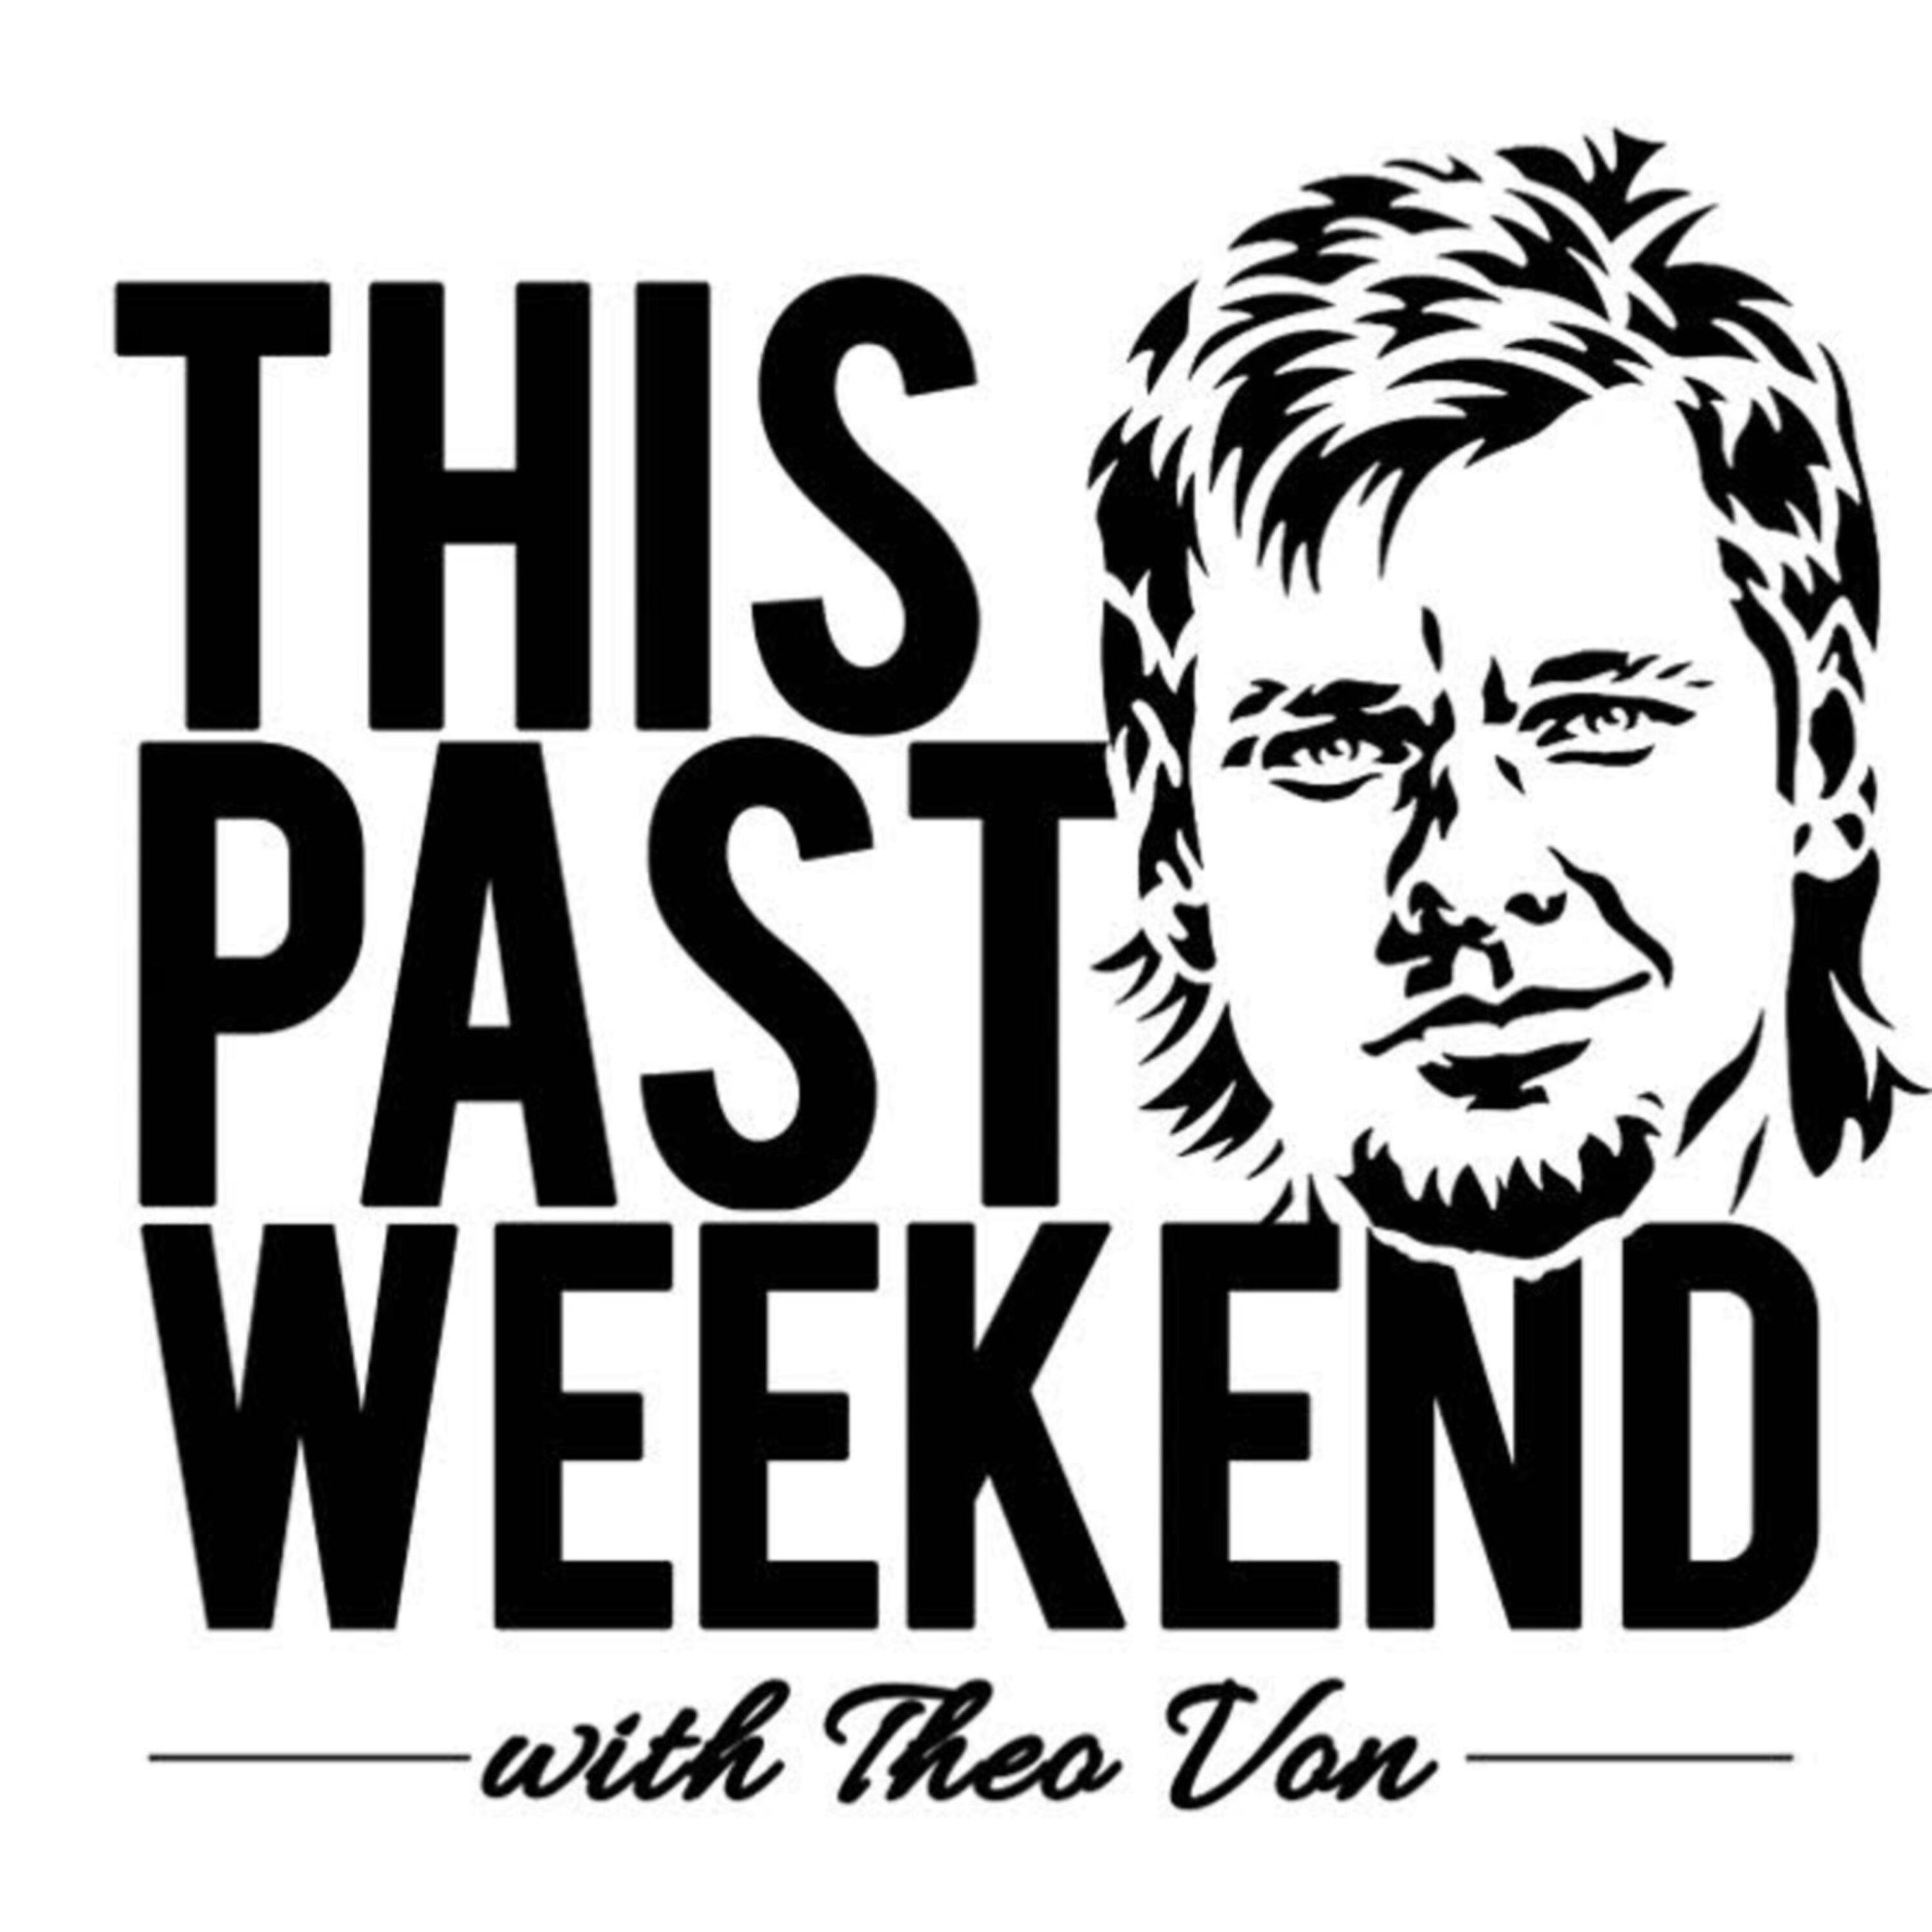 Searching for Abuelito | This Past Weekend #269 by Theo Von